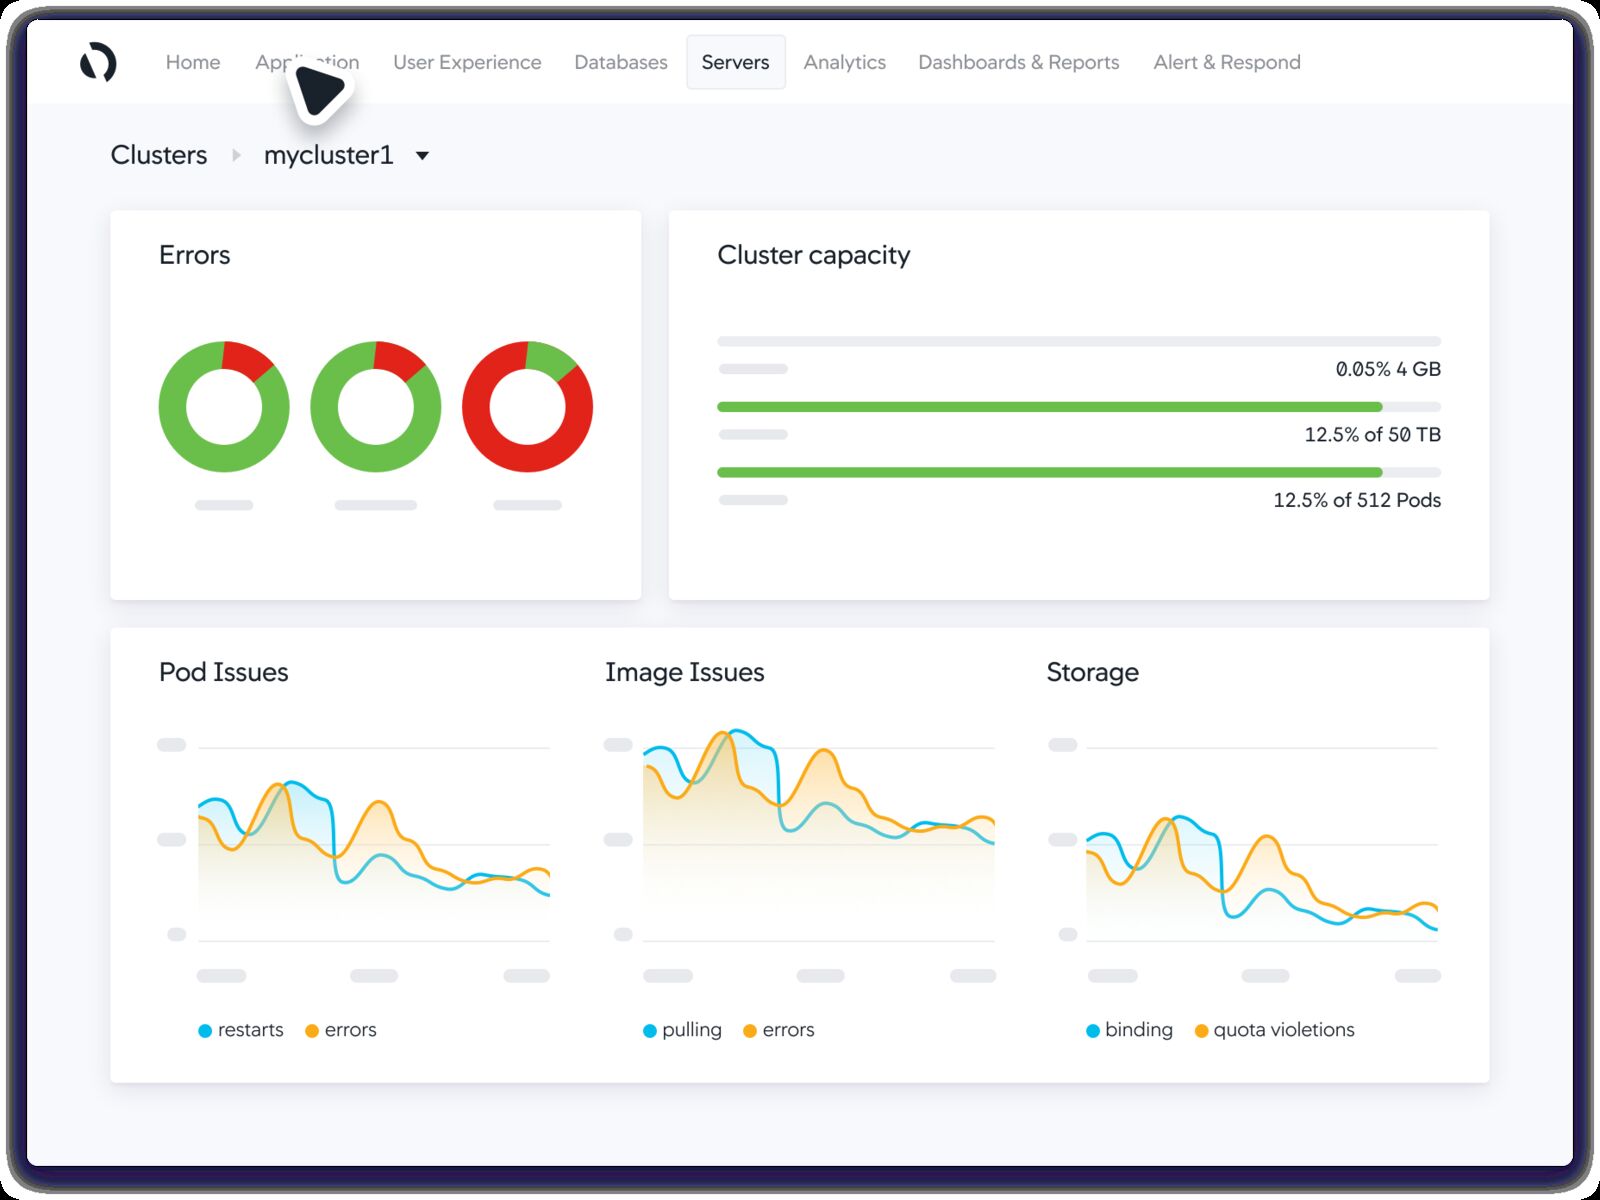 AppDynamics overview dashboard